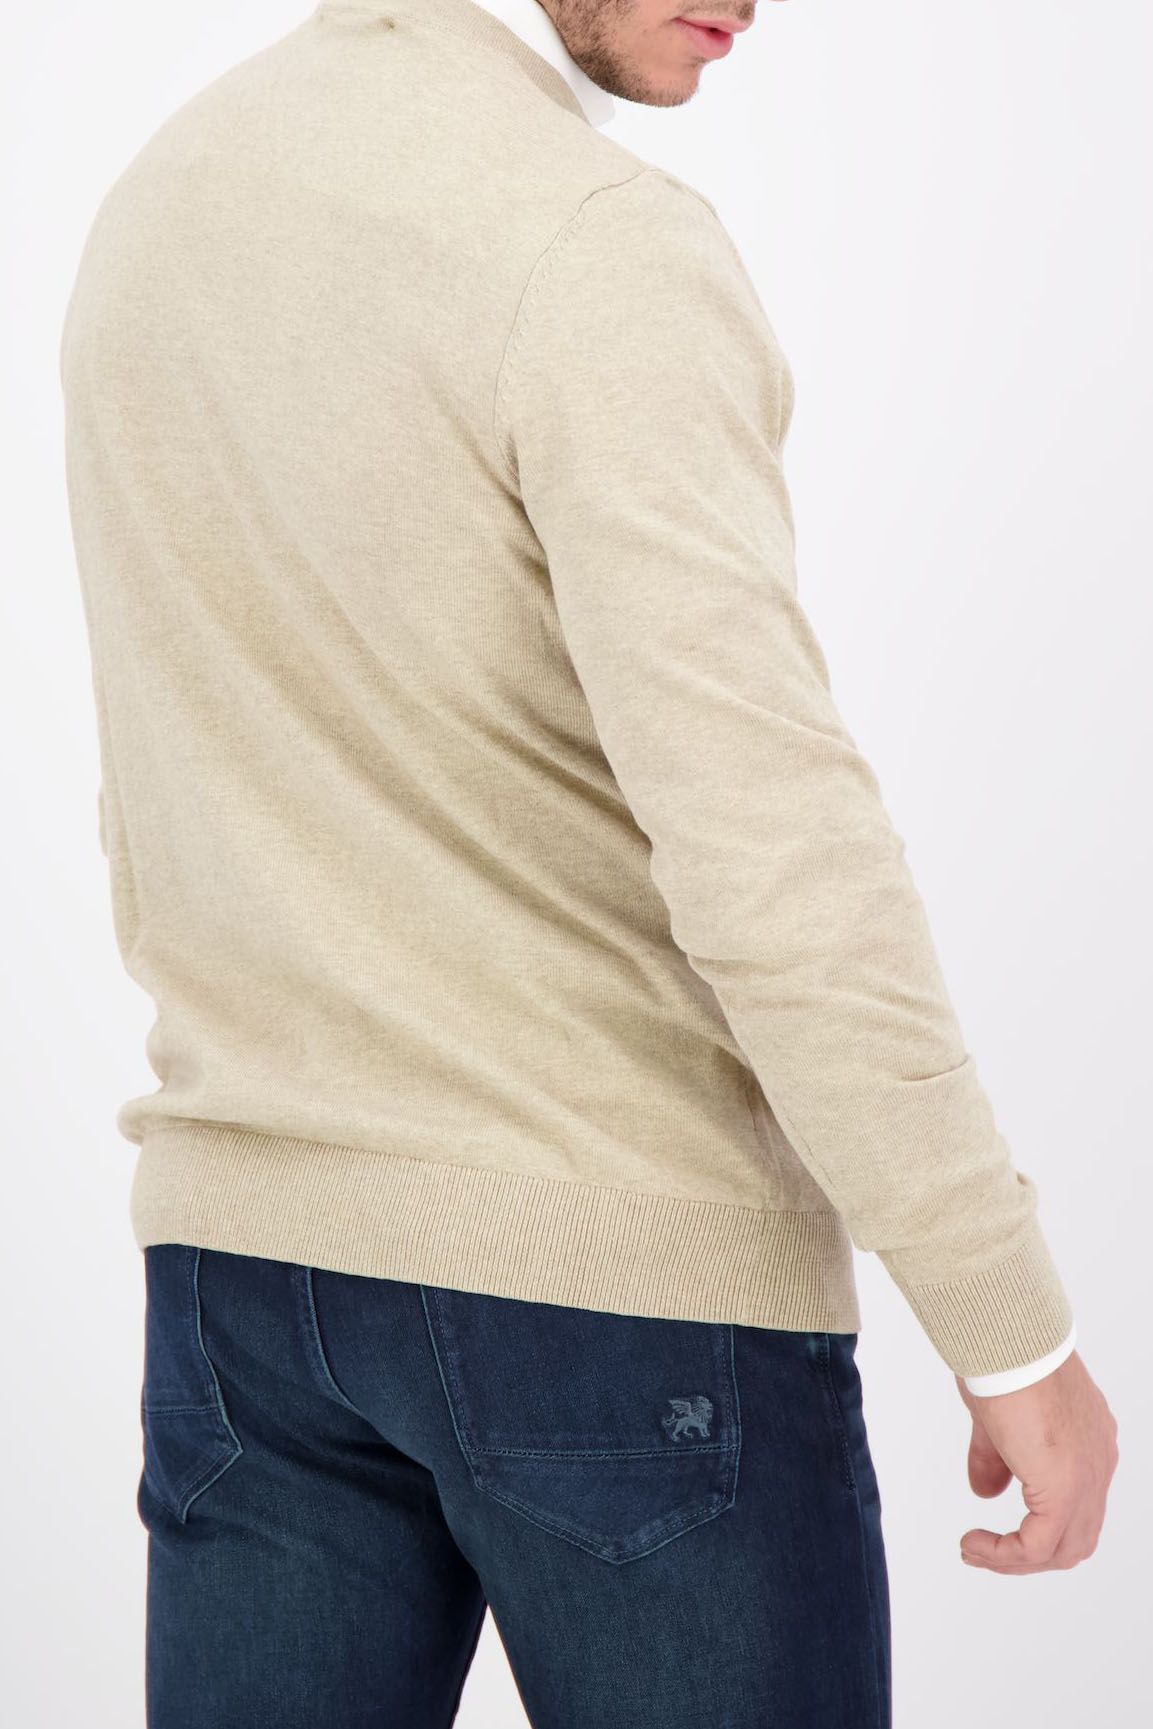 Selected Homme Trui Crew Neck Creme